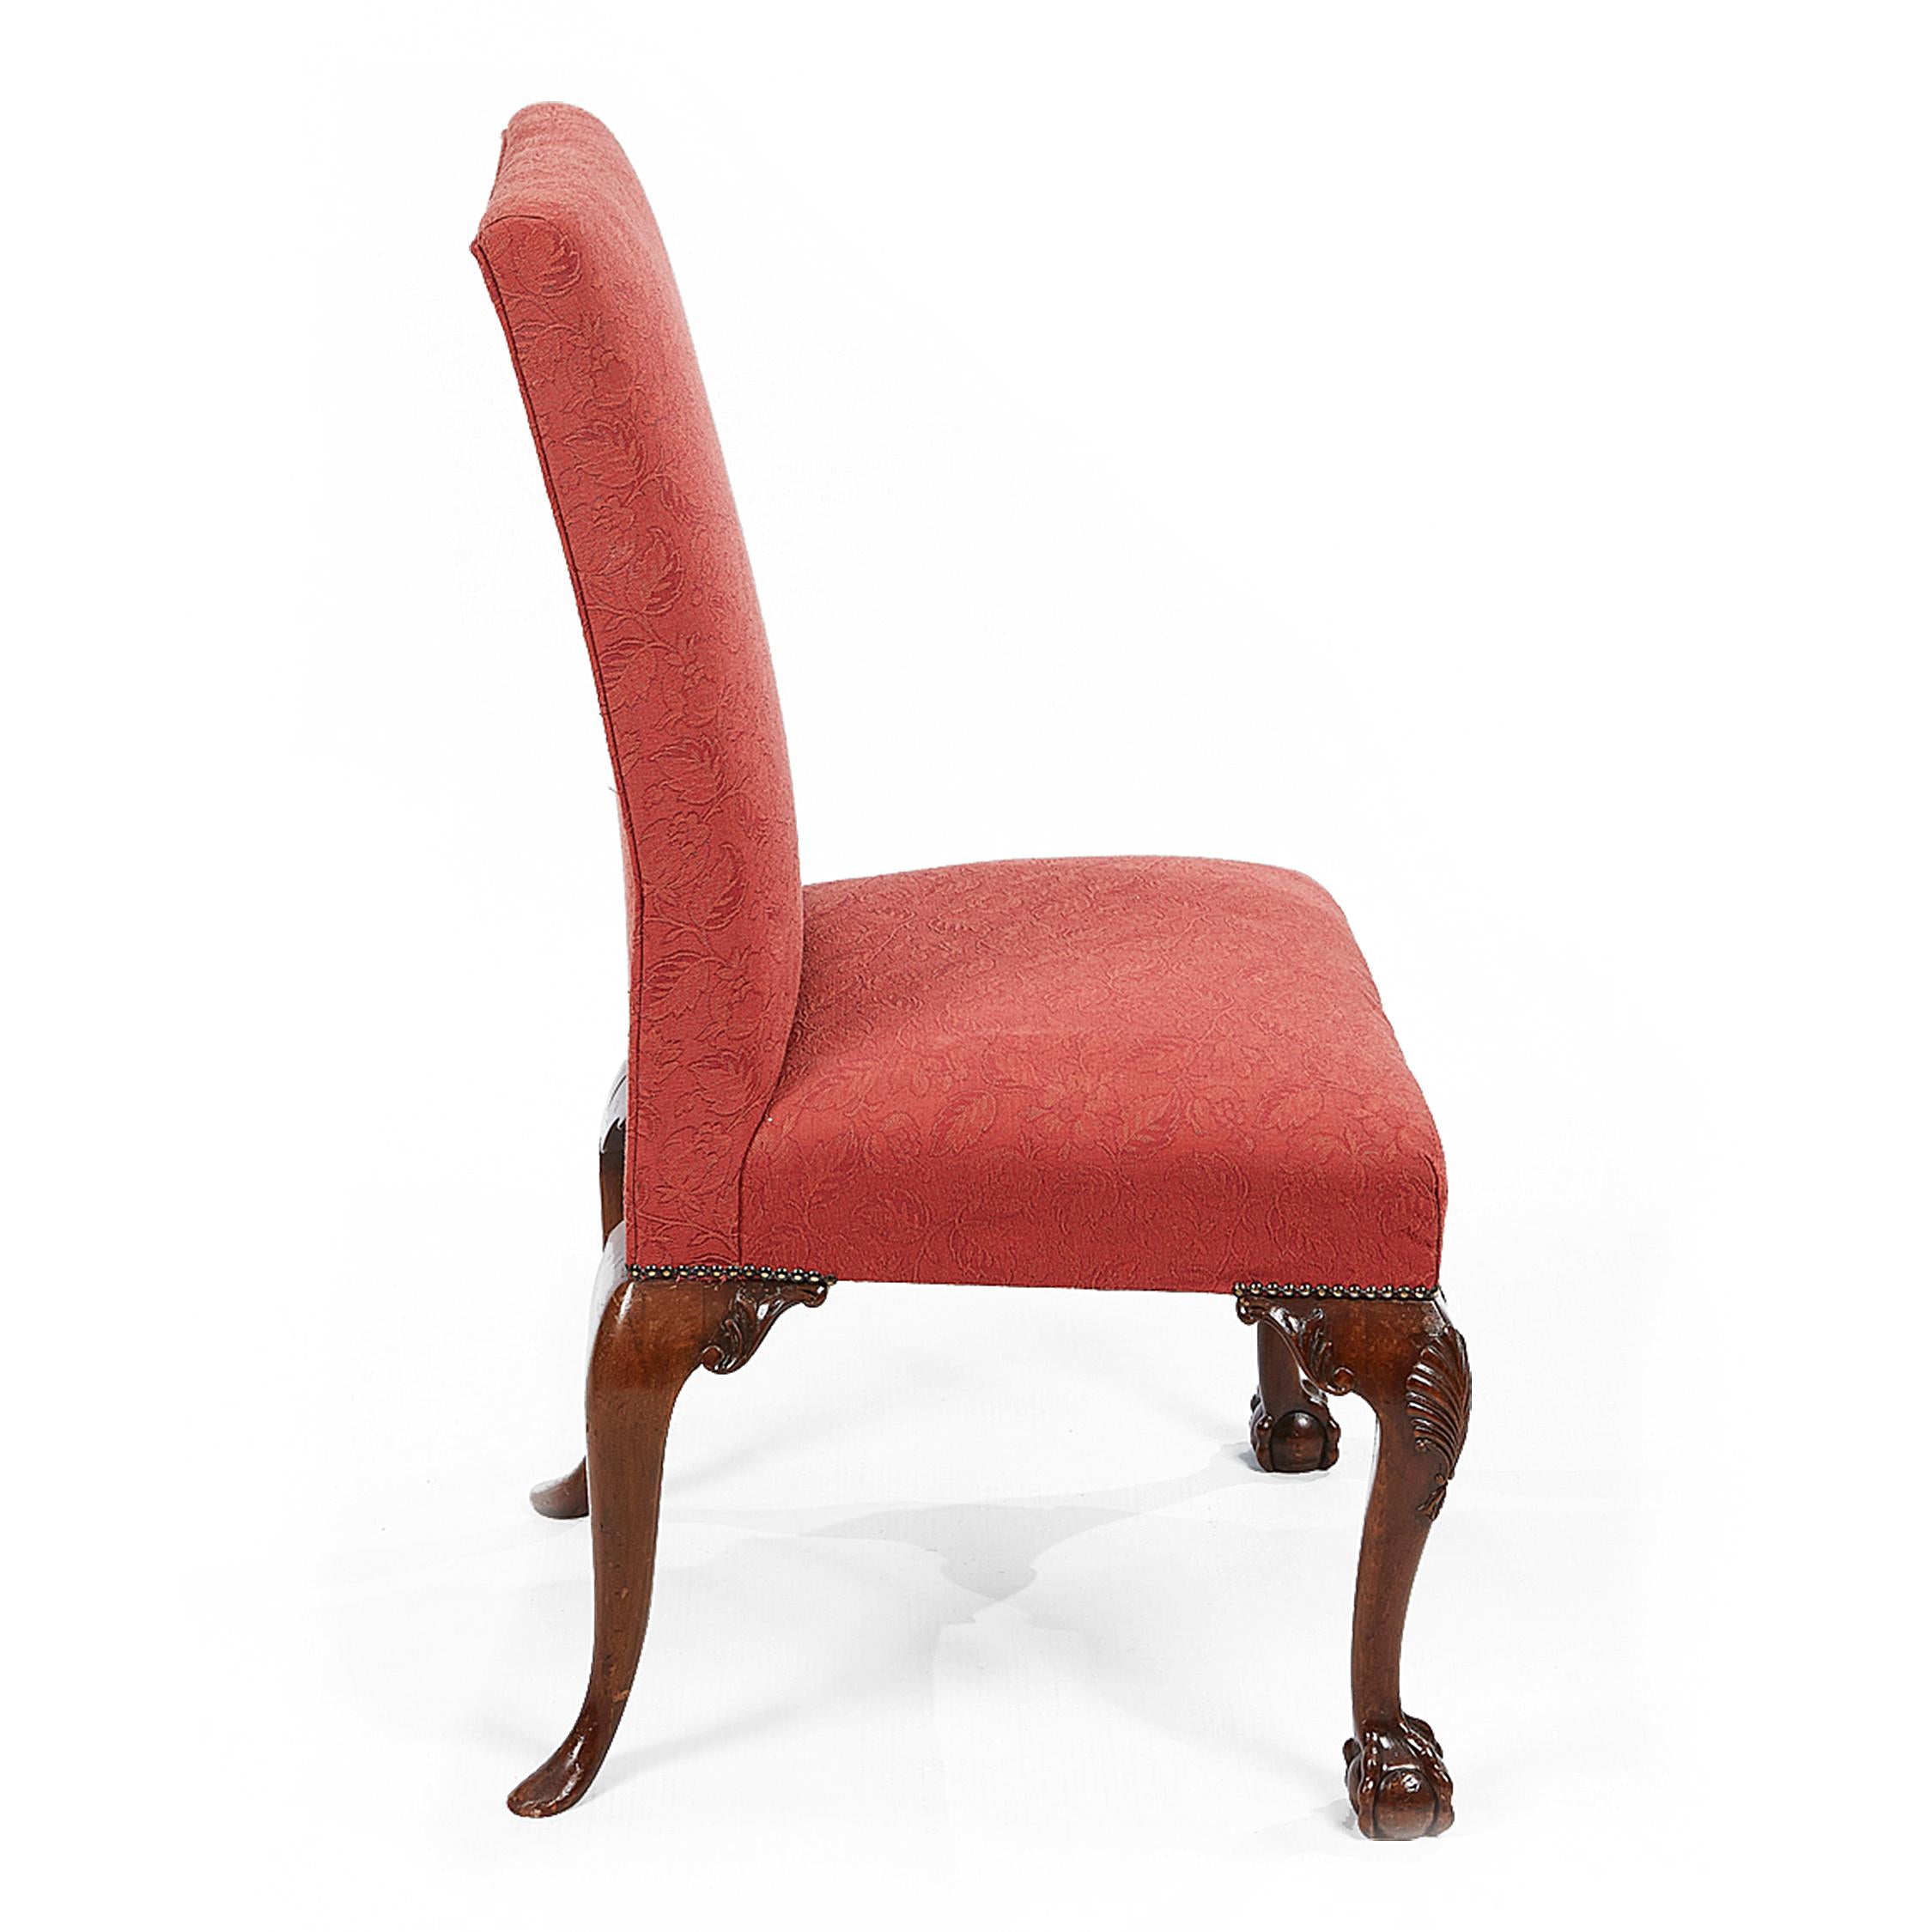 Irish Pair of 19th Century Georgian Upholstered Side Chairs with Ball and Claw Feet